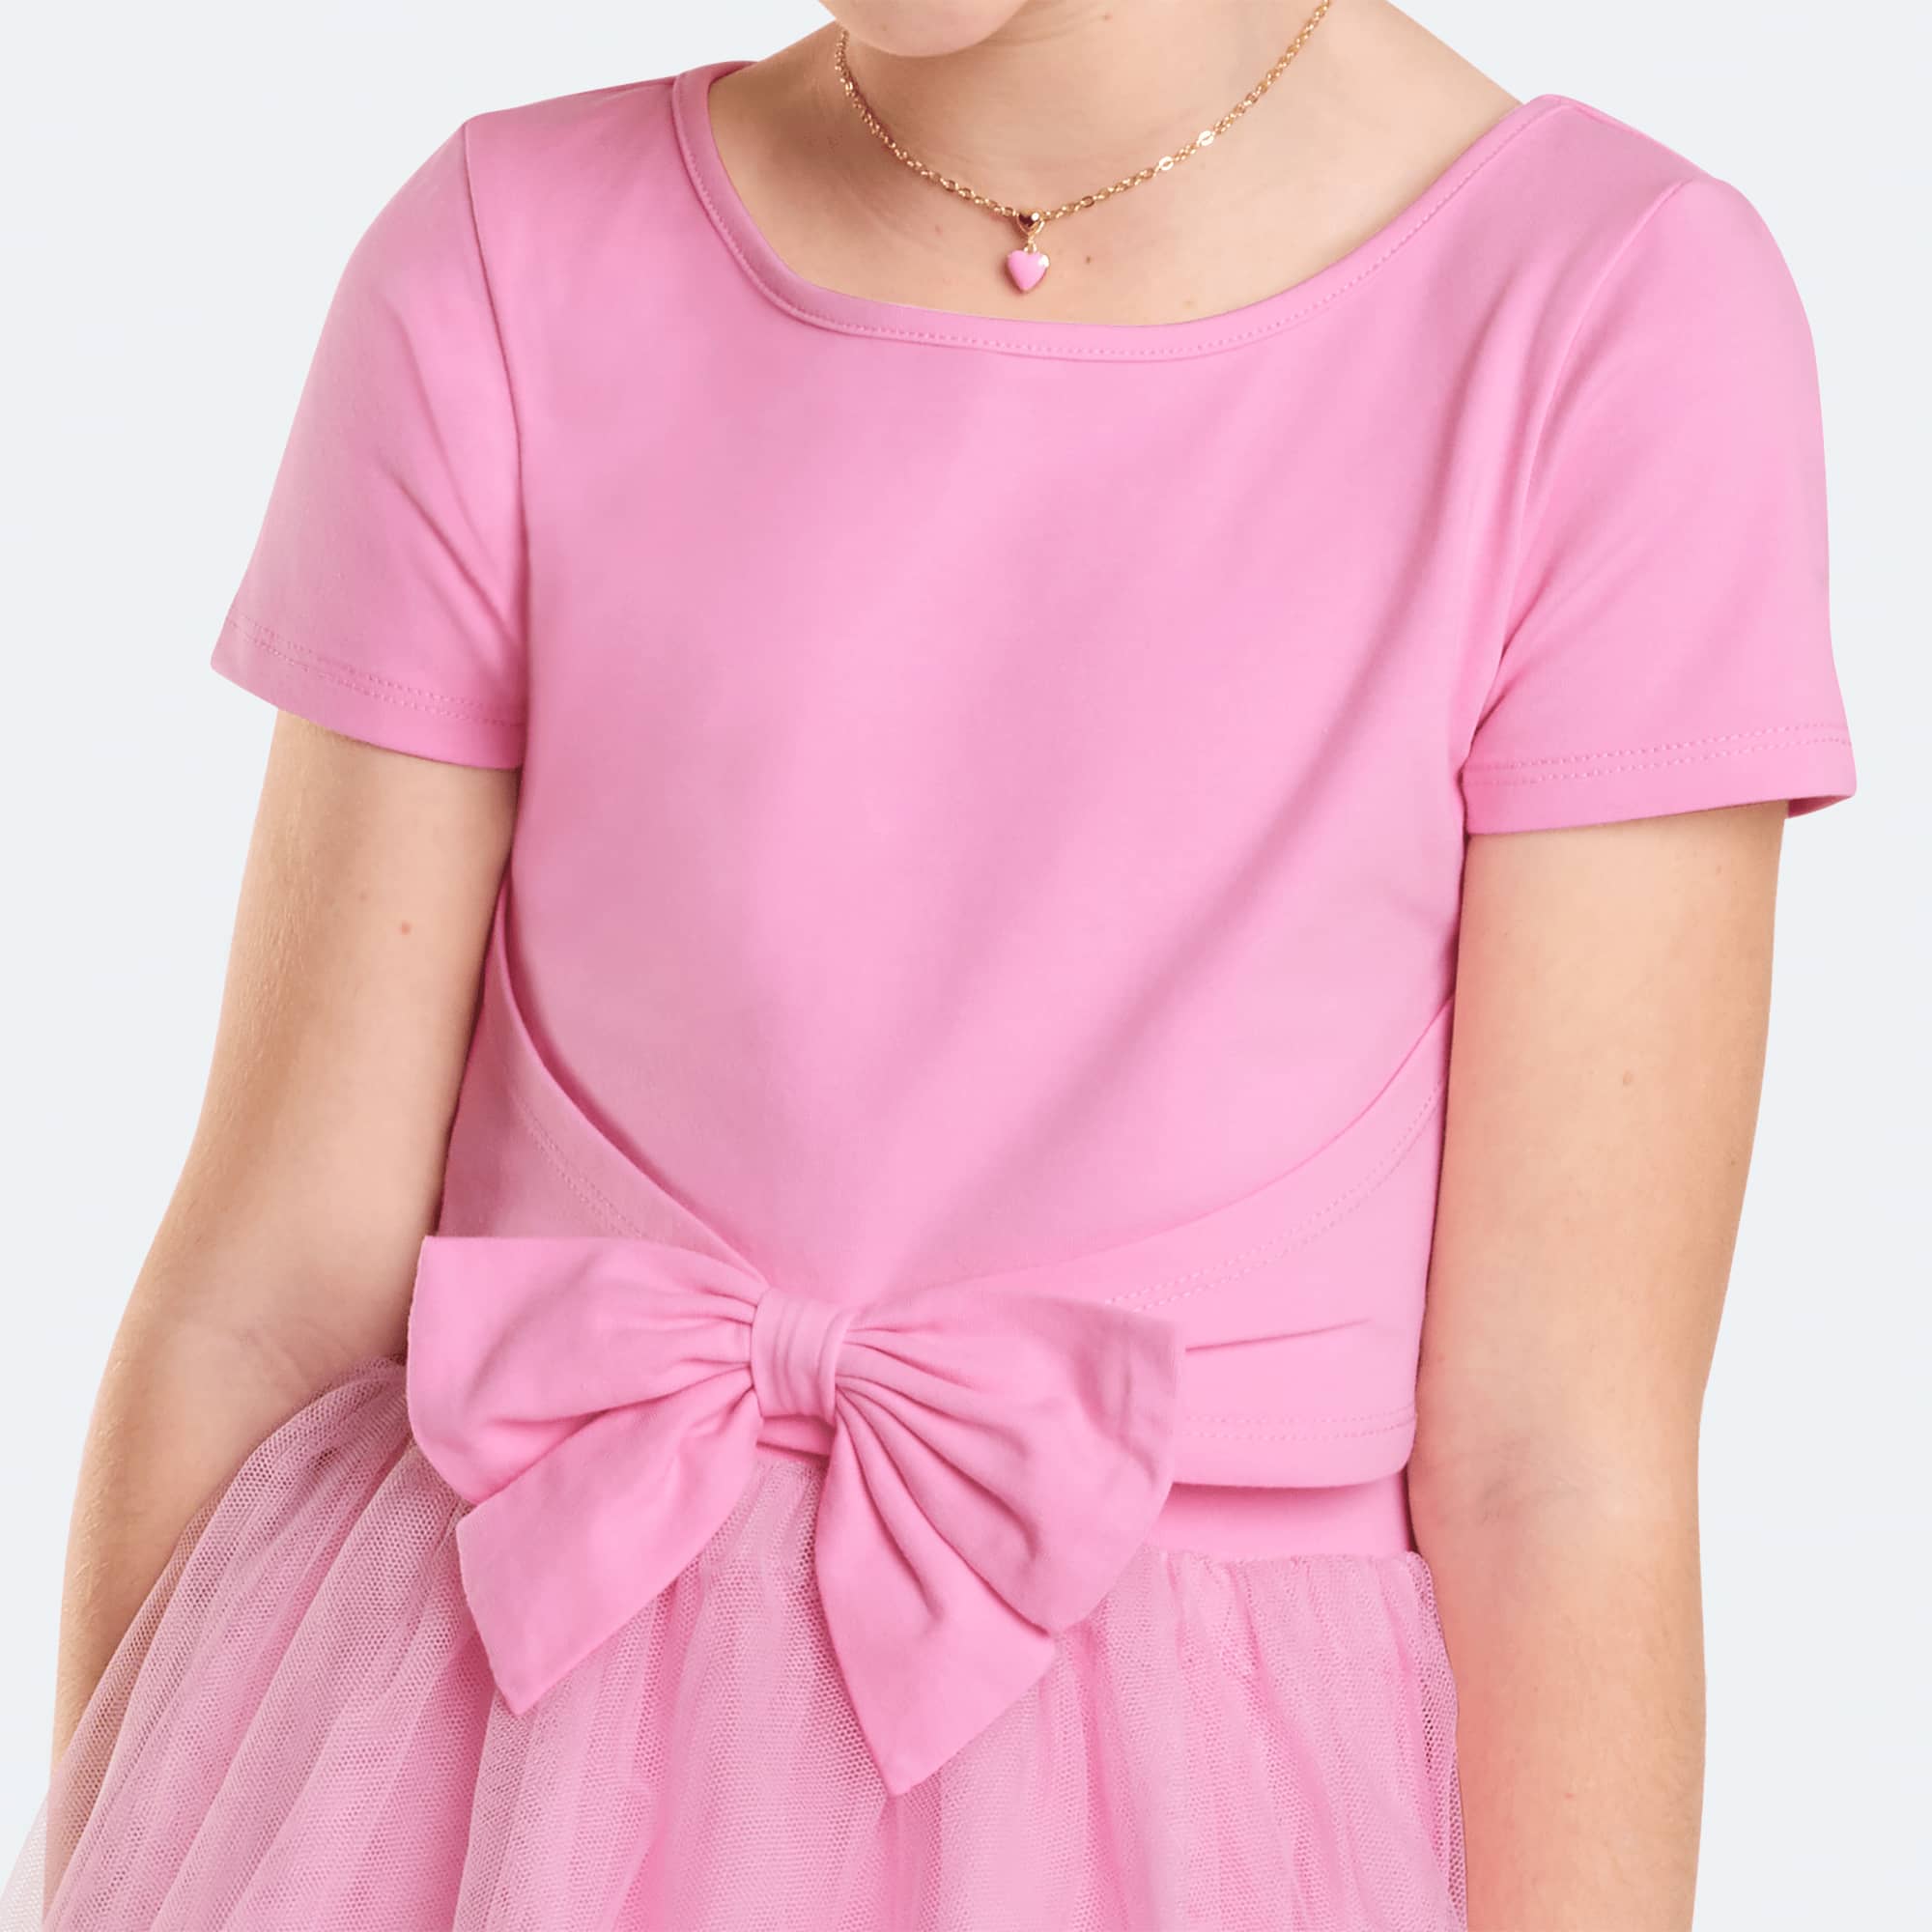 American Girl® x Something Navy Pastel-Pink Bow-Front Top for Girls